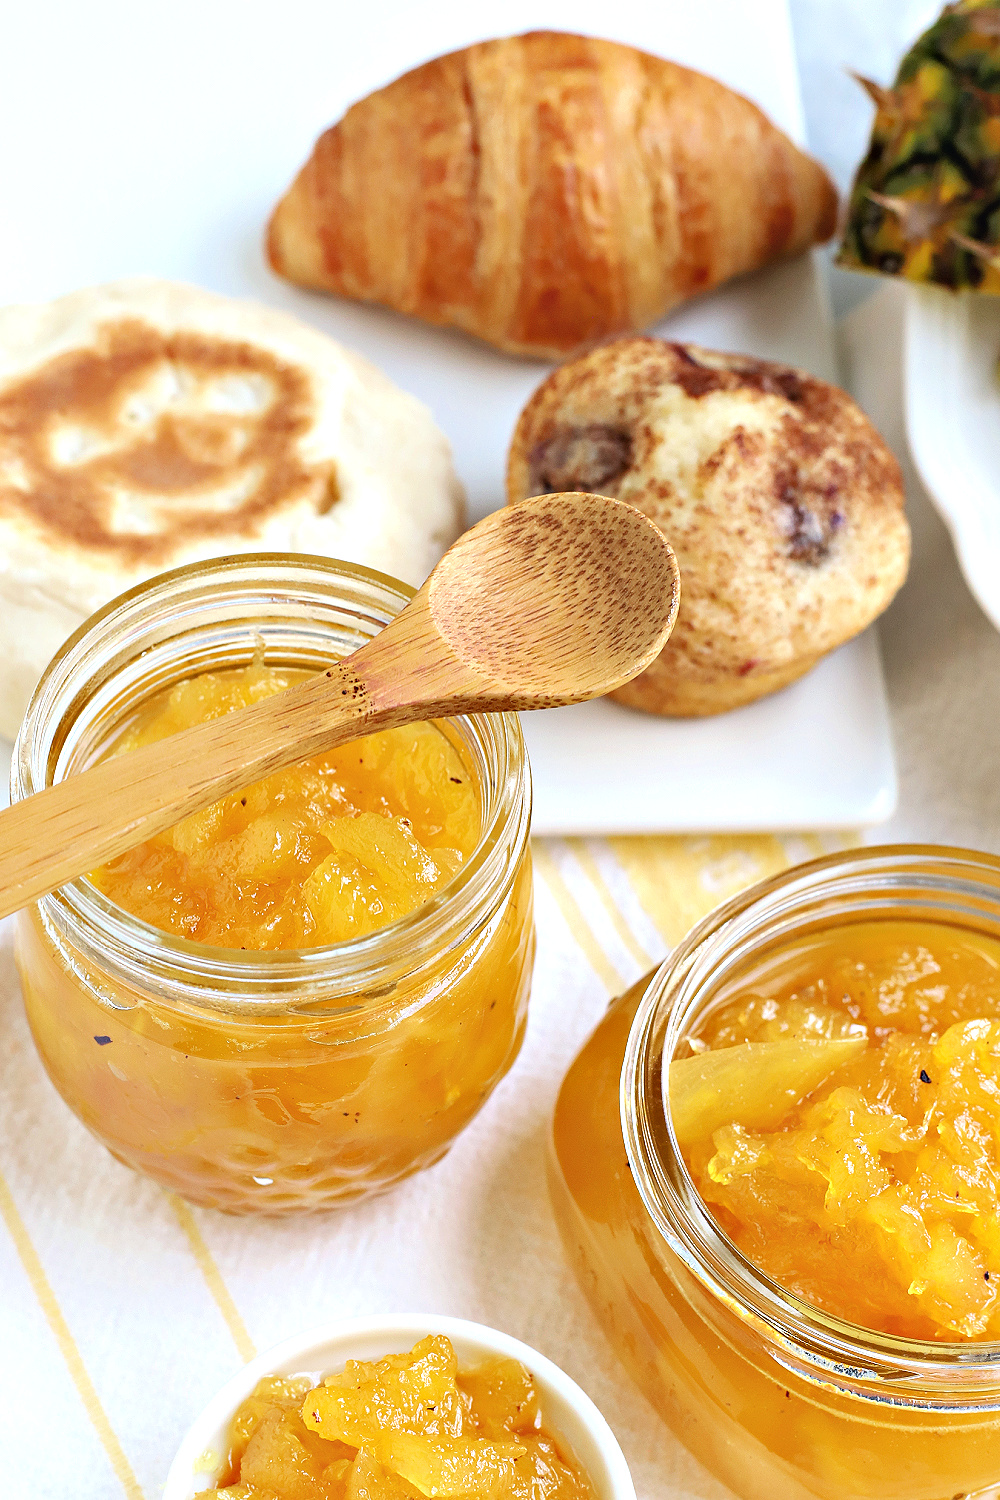 Super quick and easy recipe for fresh pineapple jam using just a few ingredients. Makes a small batch perfect on toast and ice cream topping. 